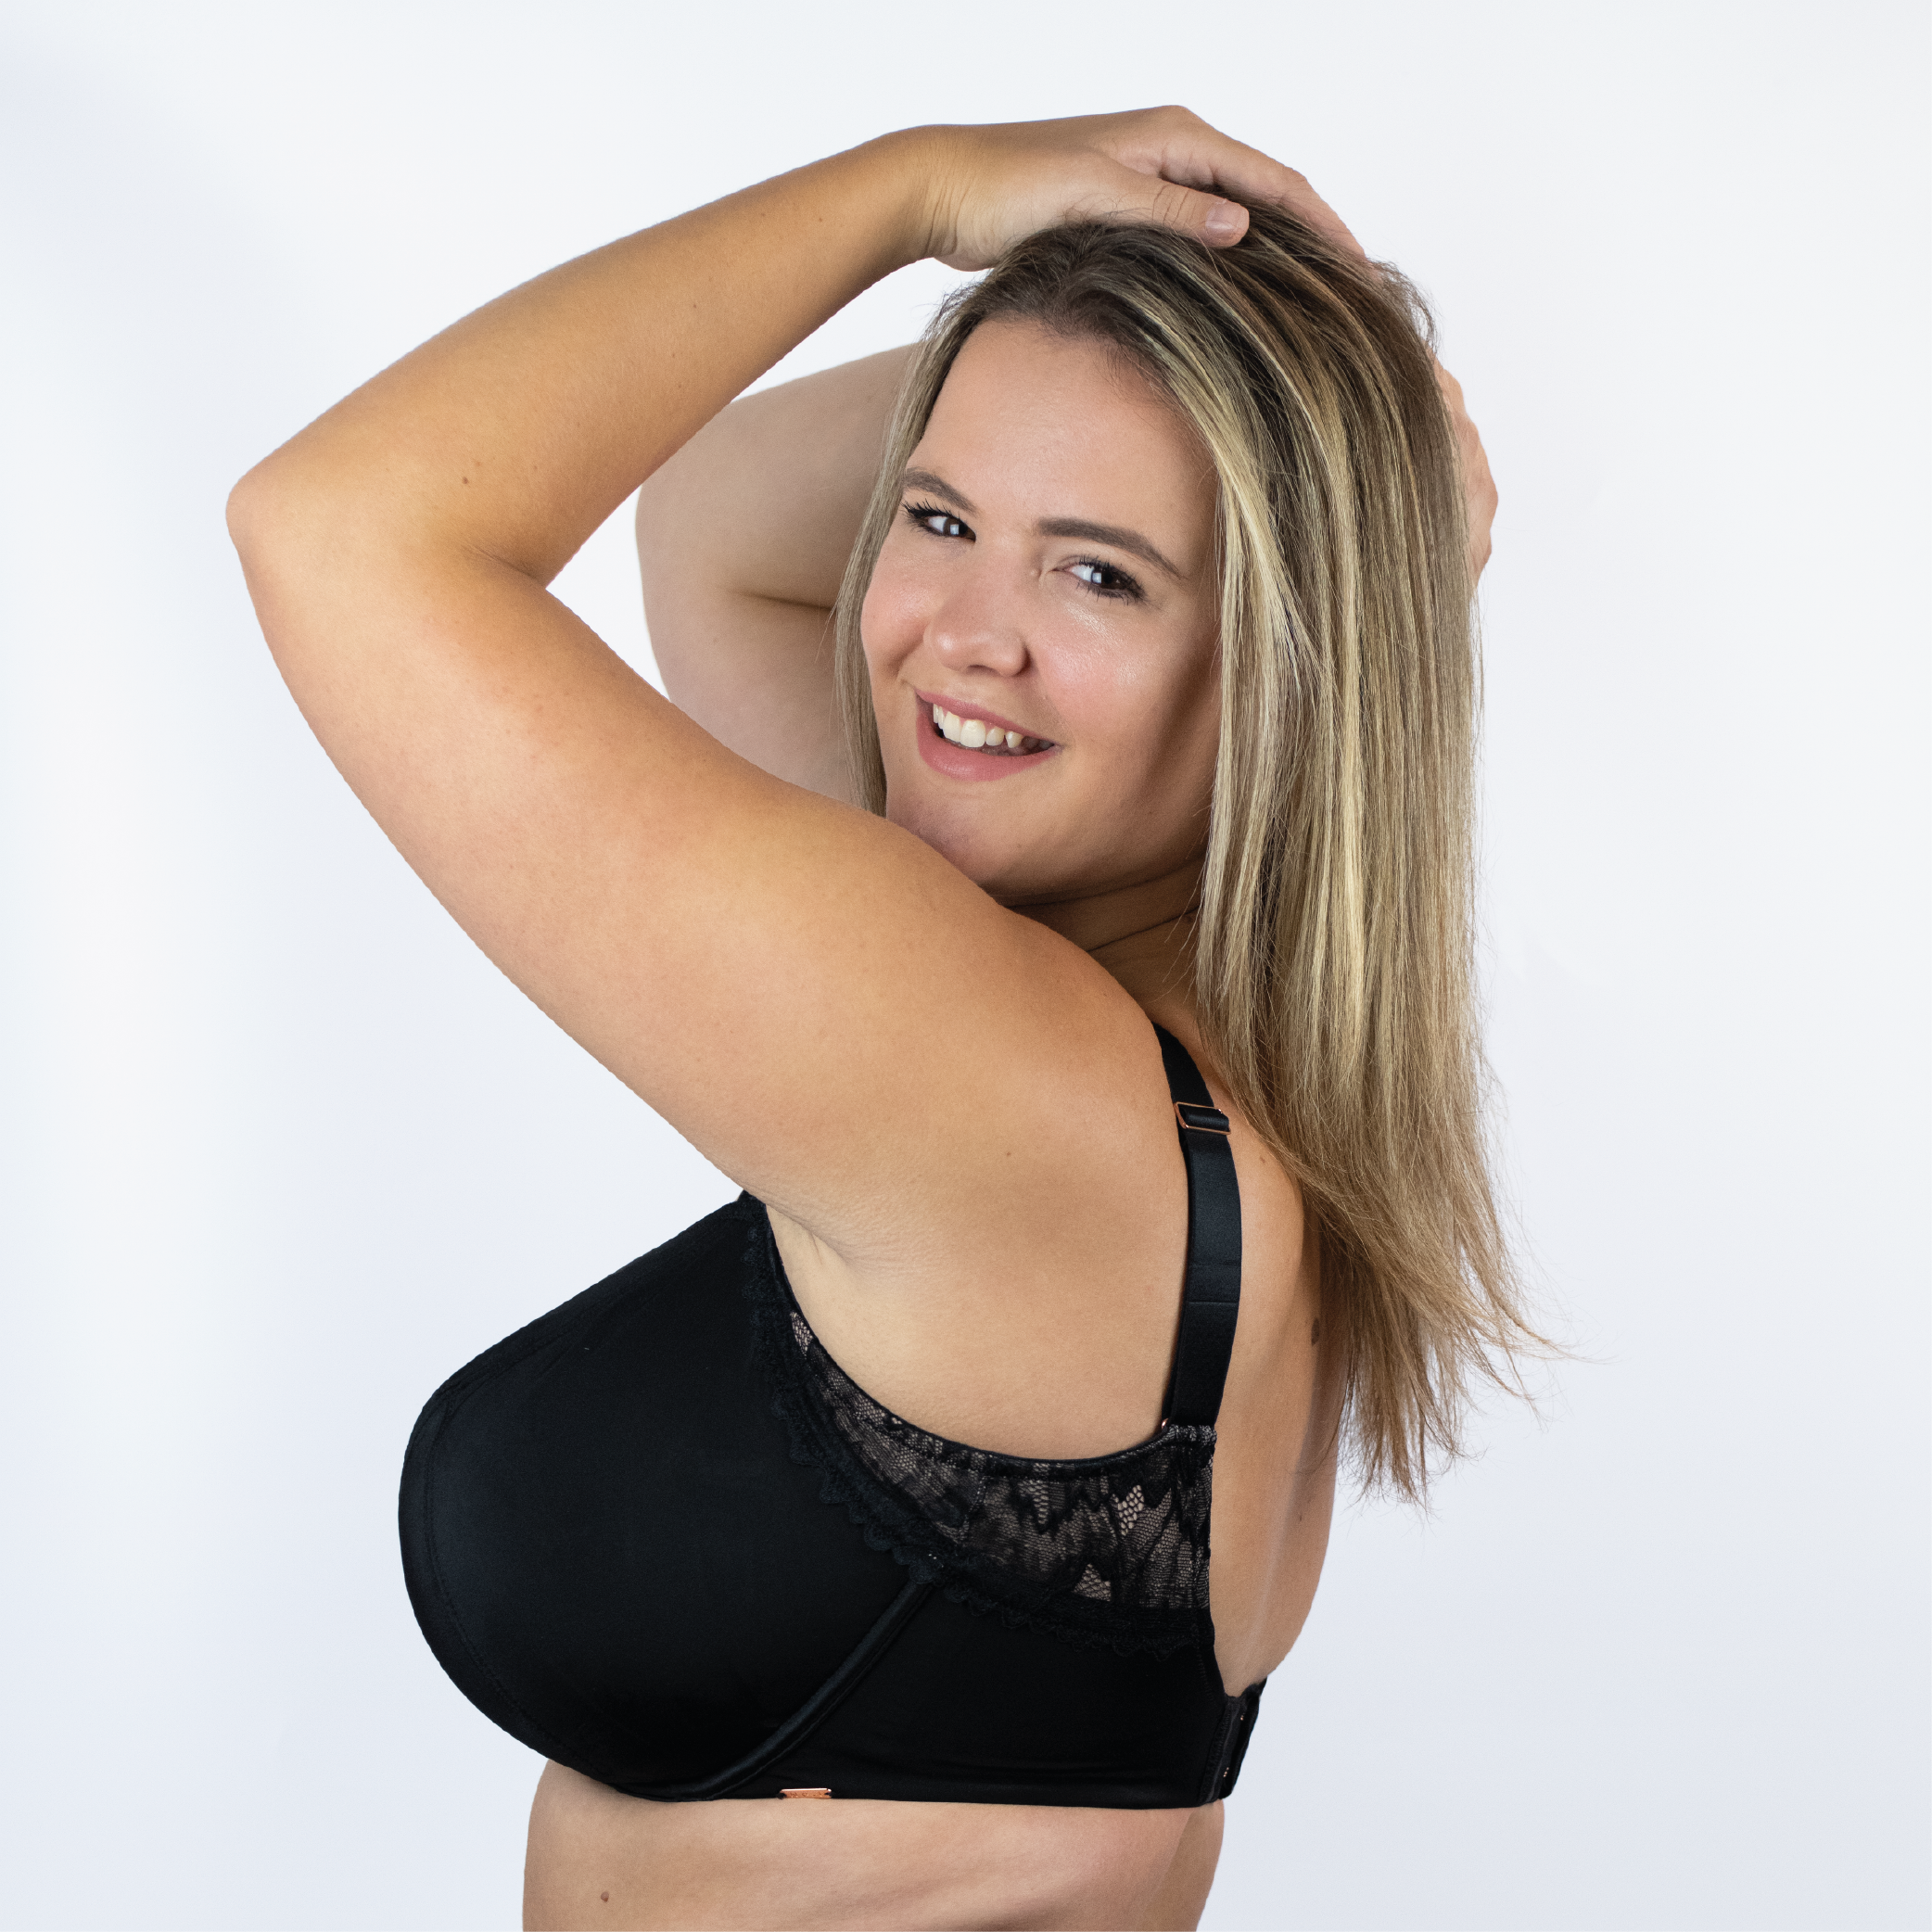 No.1 Bra - This is our 'AVA' in a size 32H! Uplifting and